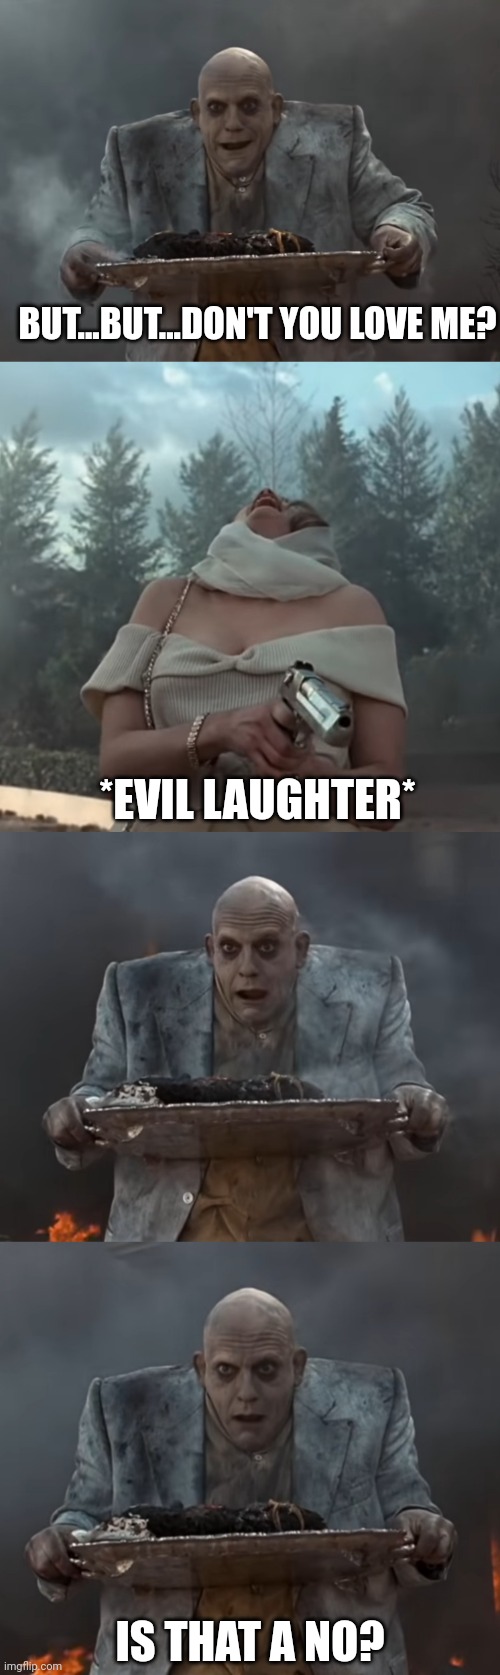 Addams Family Values Is That a No? | BUT...BUT...DON'T YOU LOVE ME? *EVIL LAUGHTER*; IS THAT A NO? | image tagged in memes,funny,addams family,uncle fester,love | made w/ Imgflip meme maker